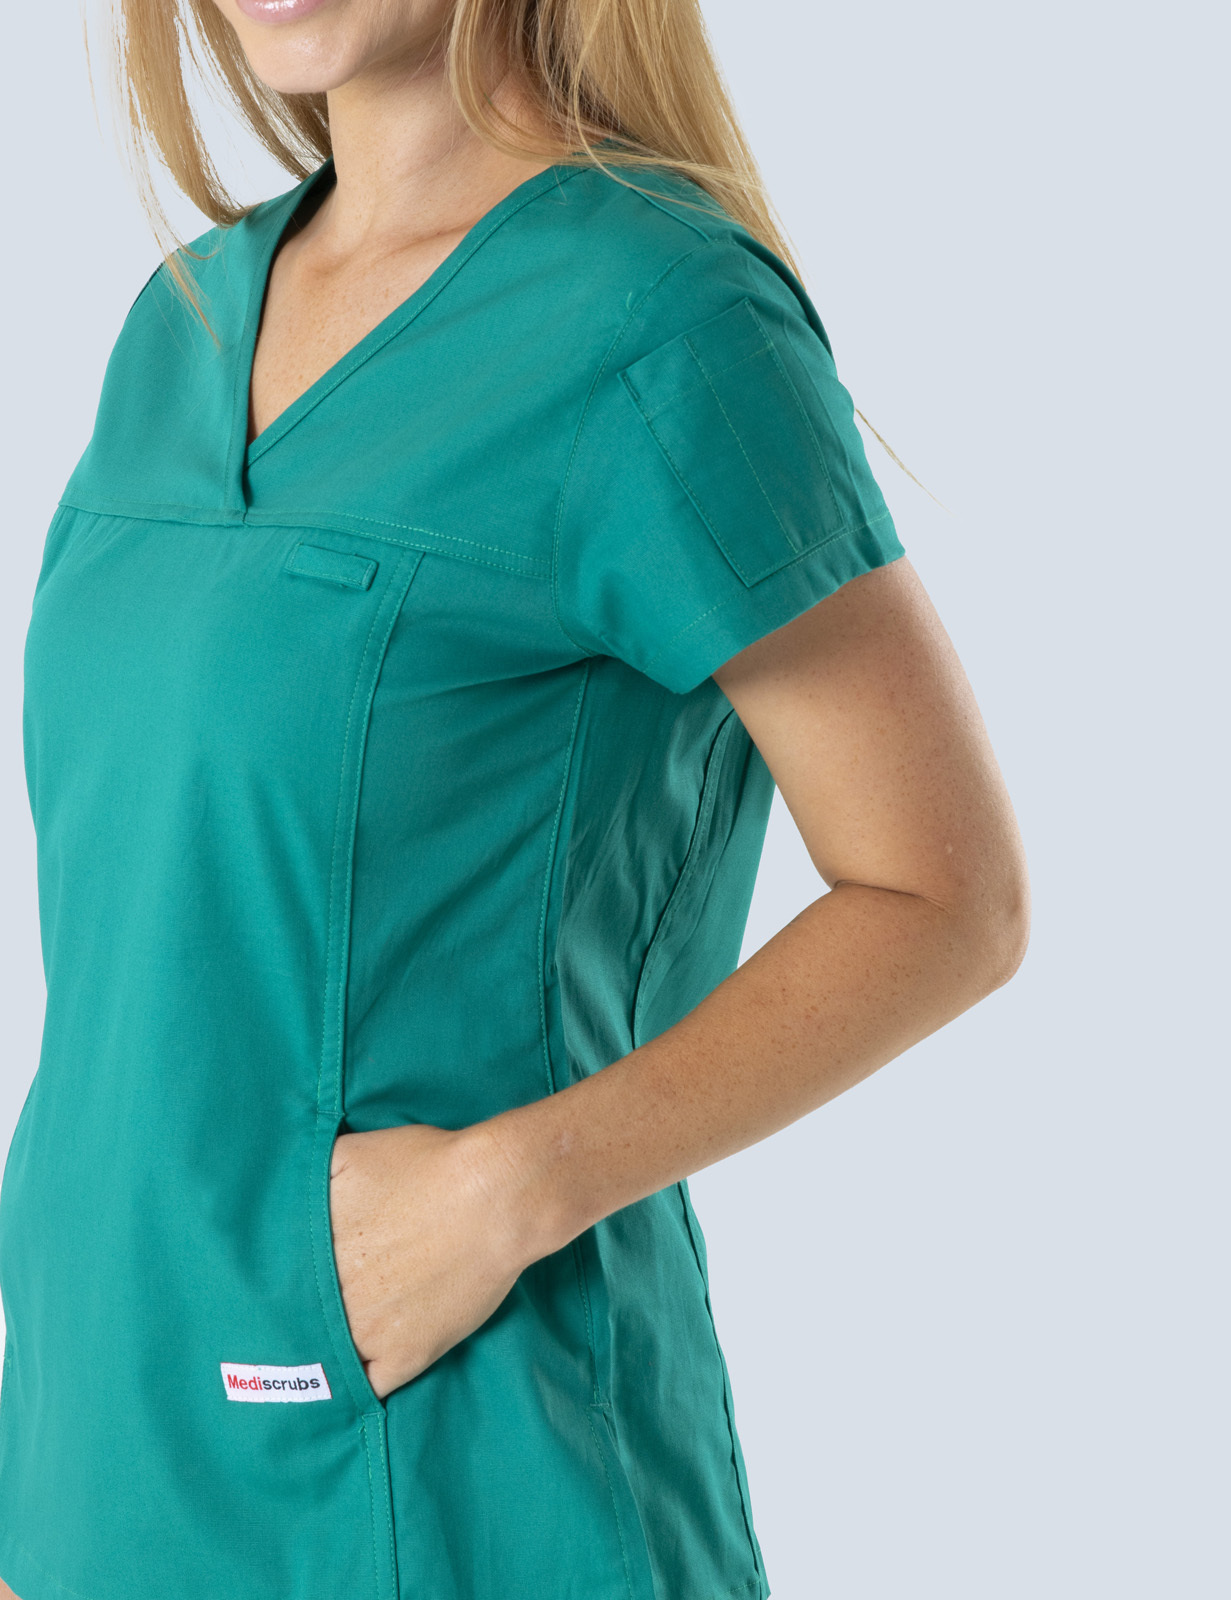 Ipswich Hospital Emergency Department Assistant In Nursing Uniform Set Bundle (Wome'ns Fit Solid Top and Cargo Pants in Hunter + 3 Logo)